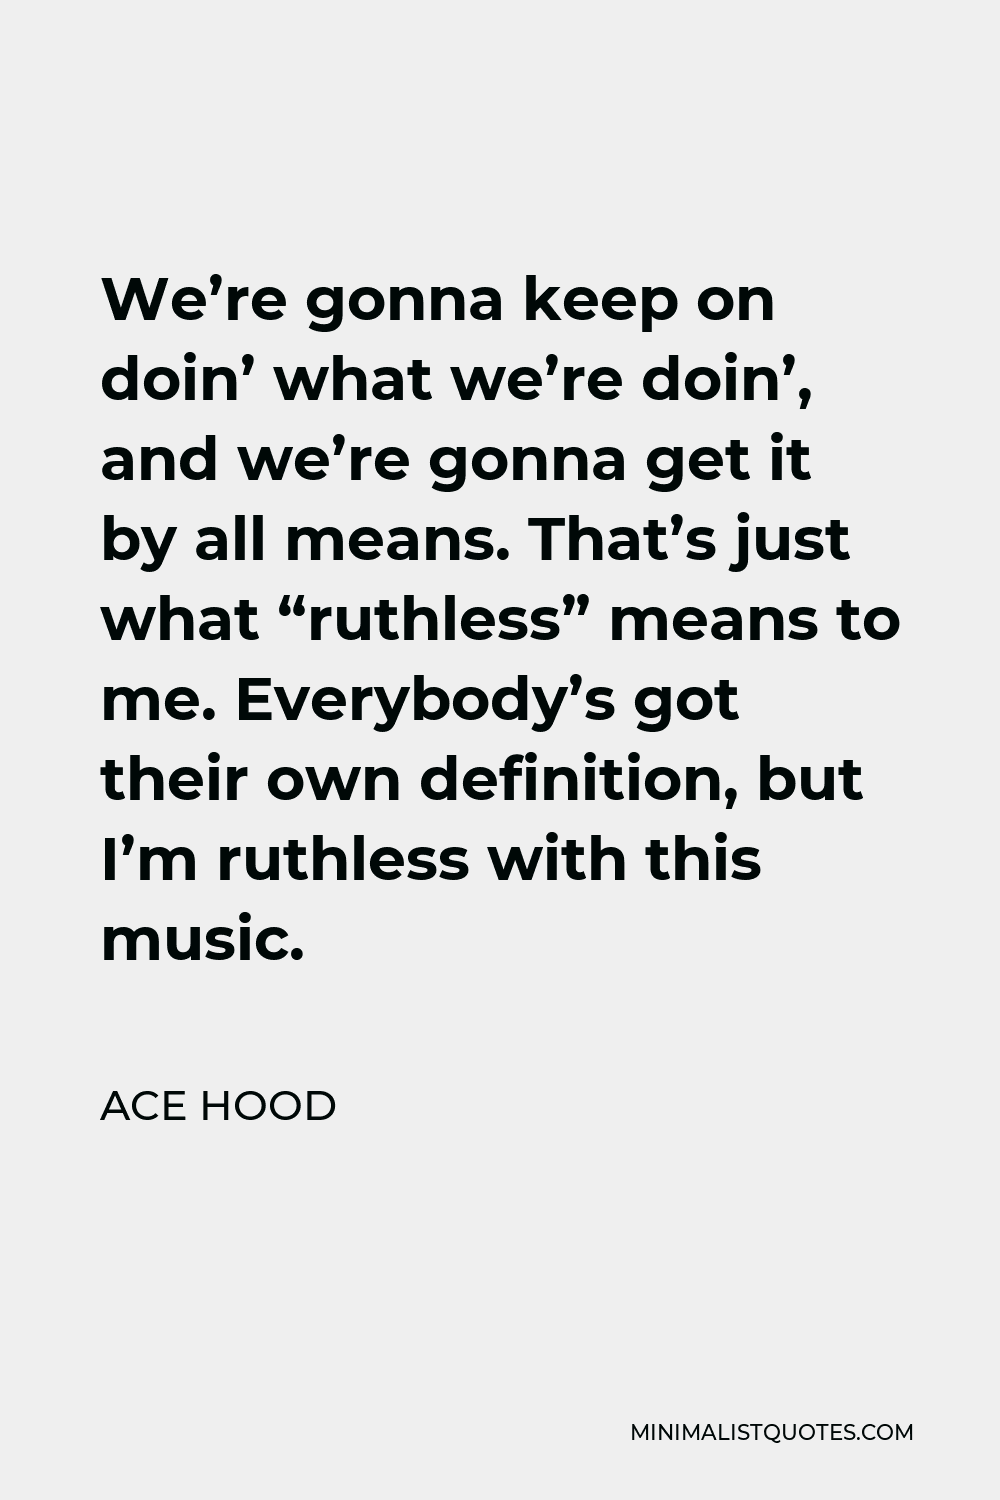 Ace Hood Quote - We’re gonna keep on doin’ what we’re doin’, and we’re gonna get it by all means. That’s just what “ruthless” means to me. Everybody’s got their own definition, but I’m ruthless with this music.